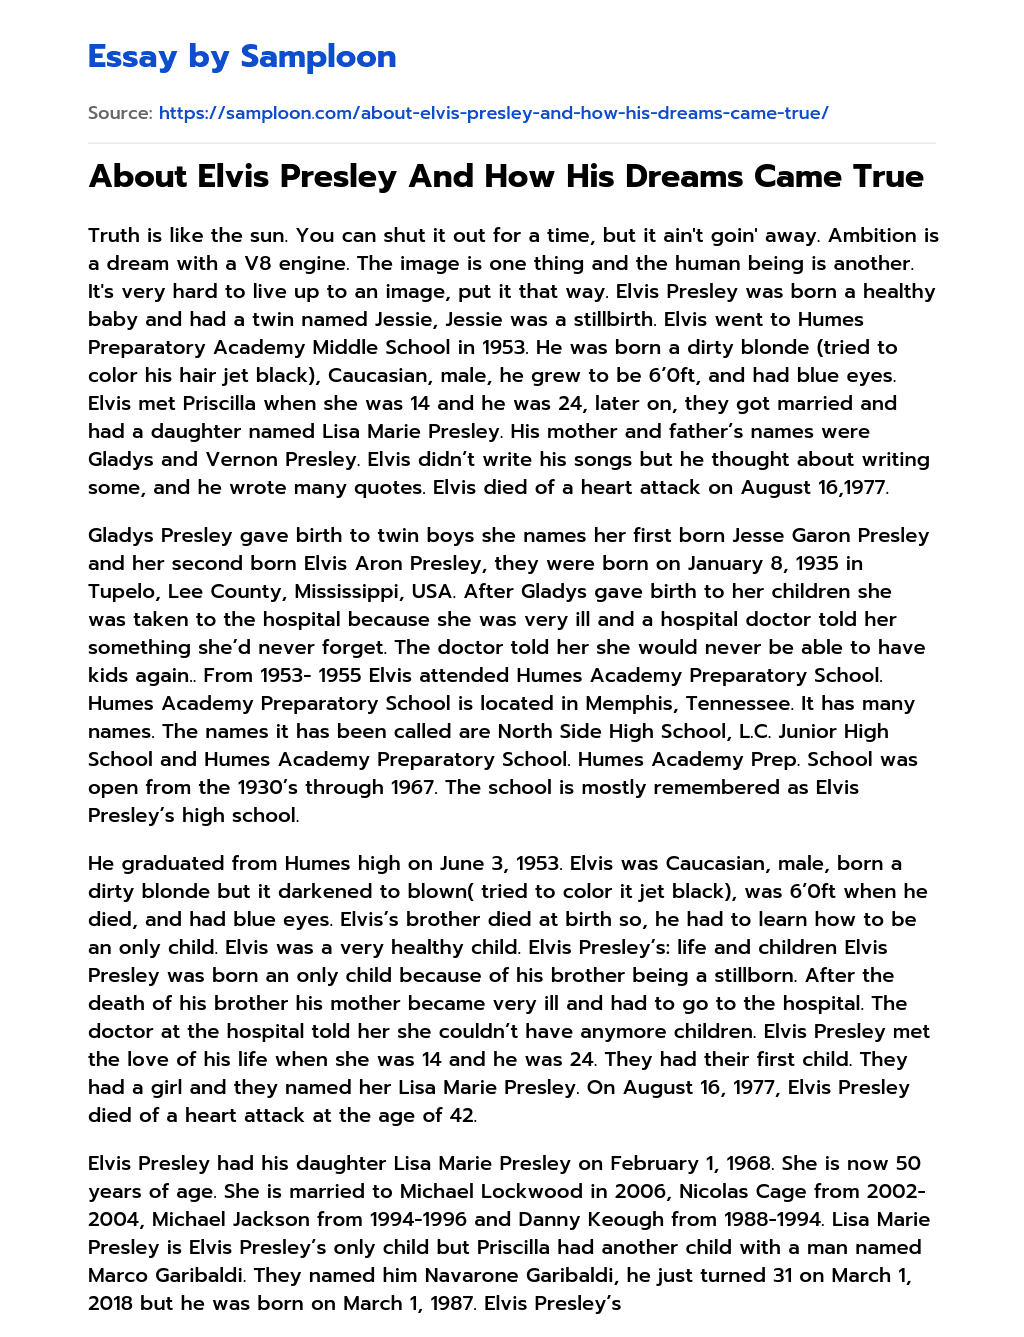 About Elvis Presley And How His Dreams Came True essay